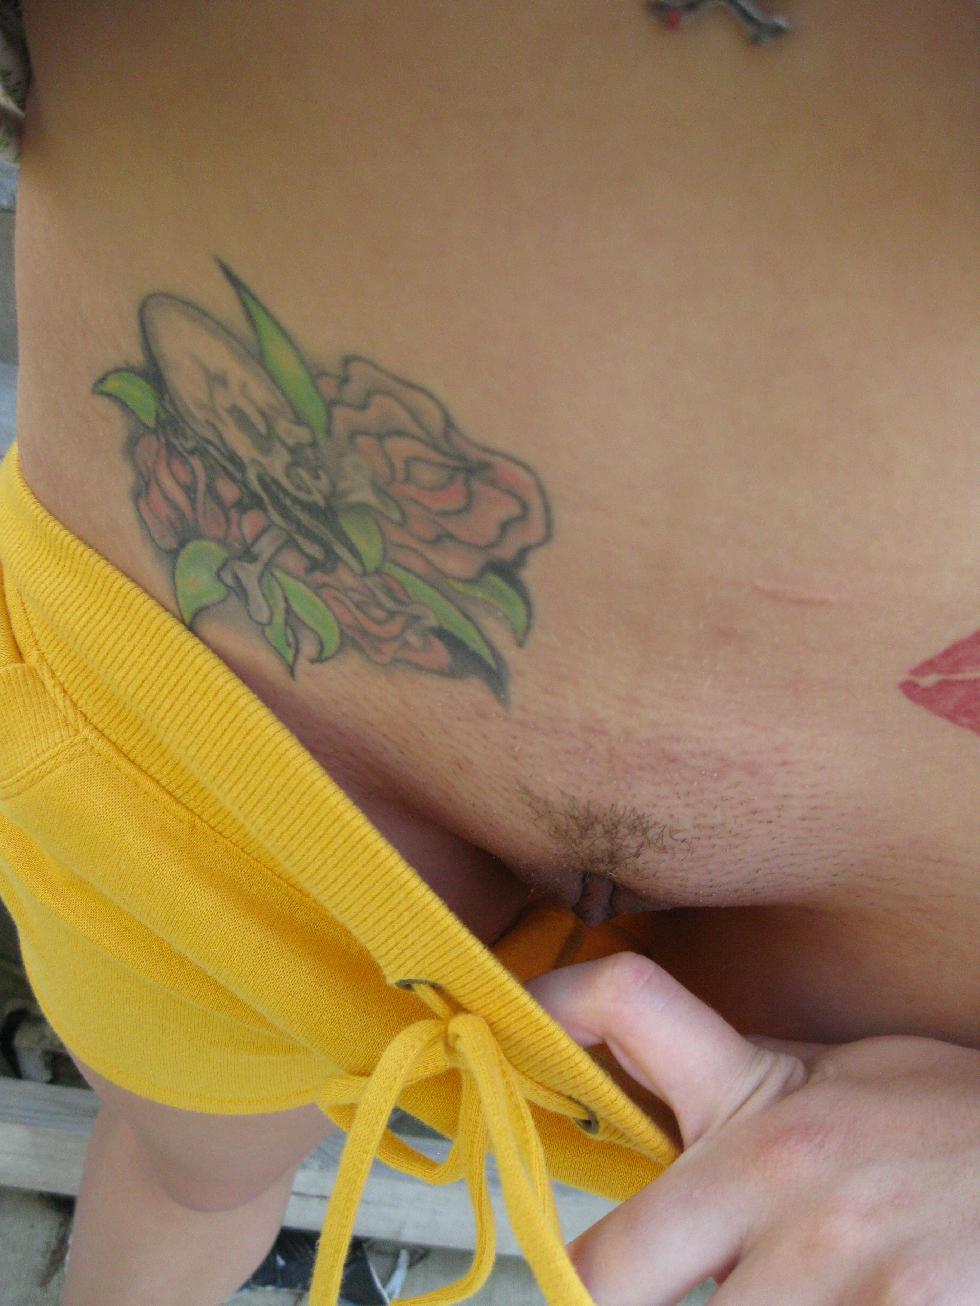 Amateur with tattoos shows boobs and pussy - 11